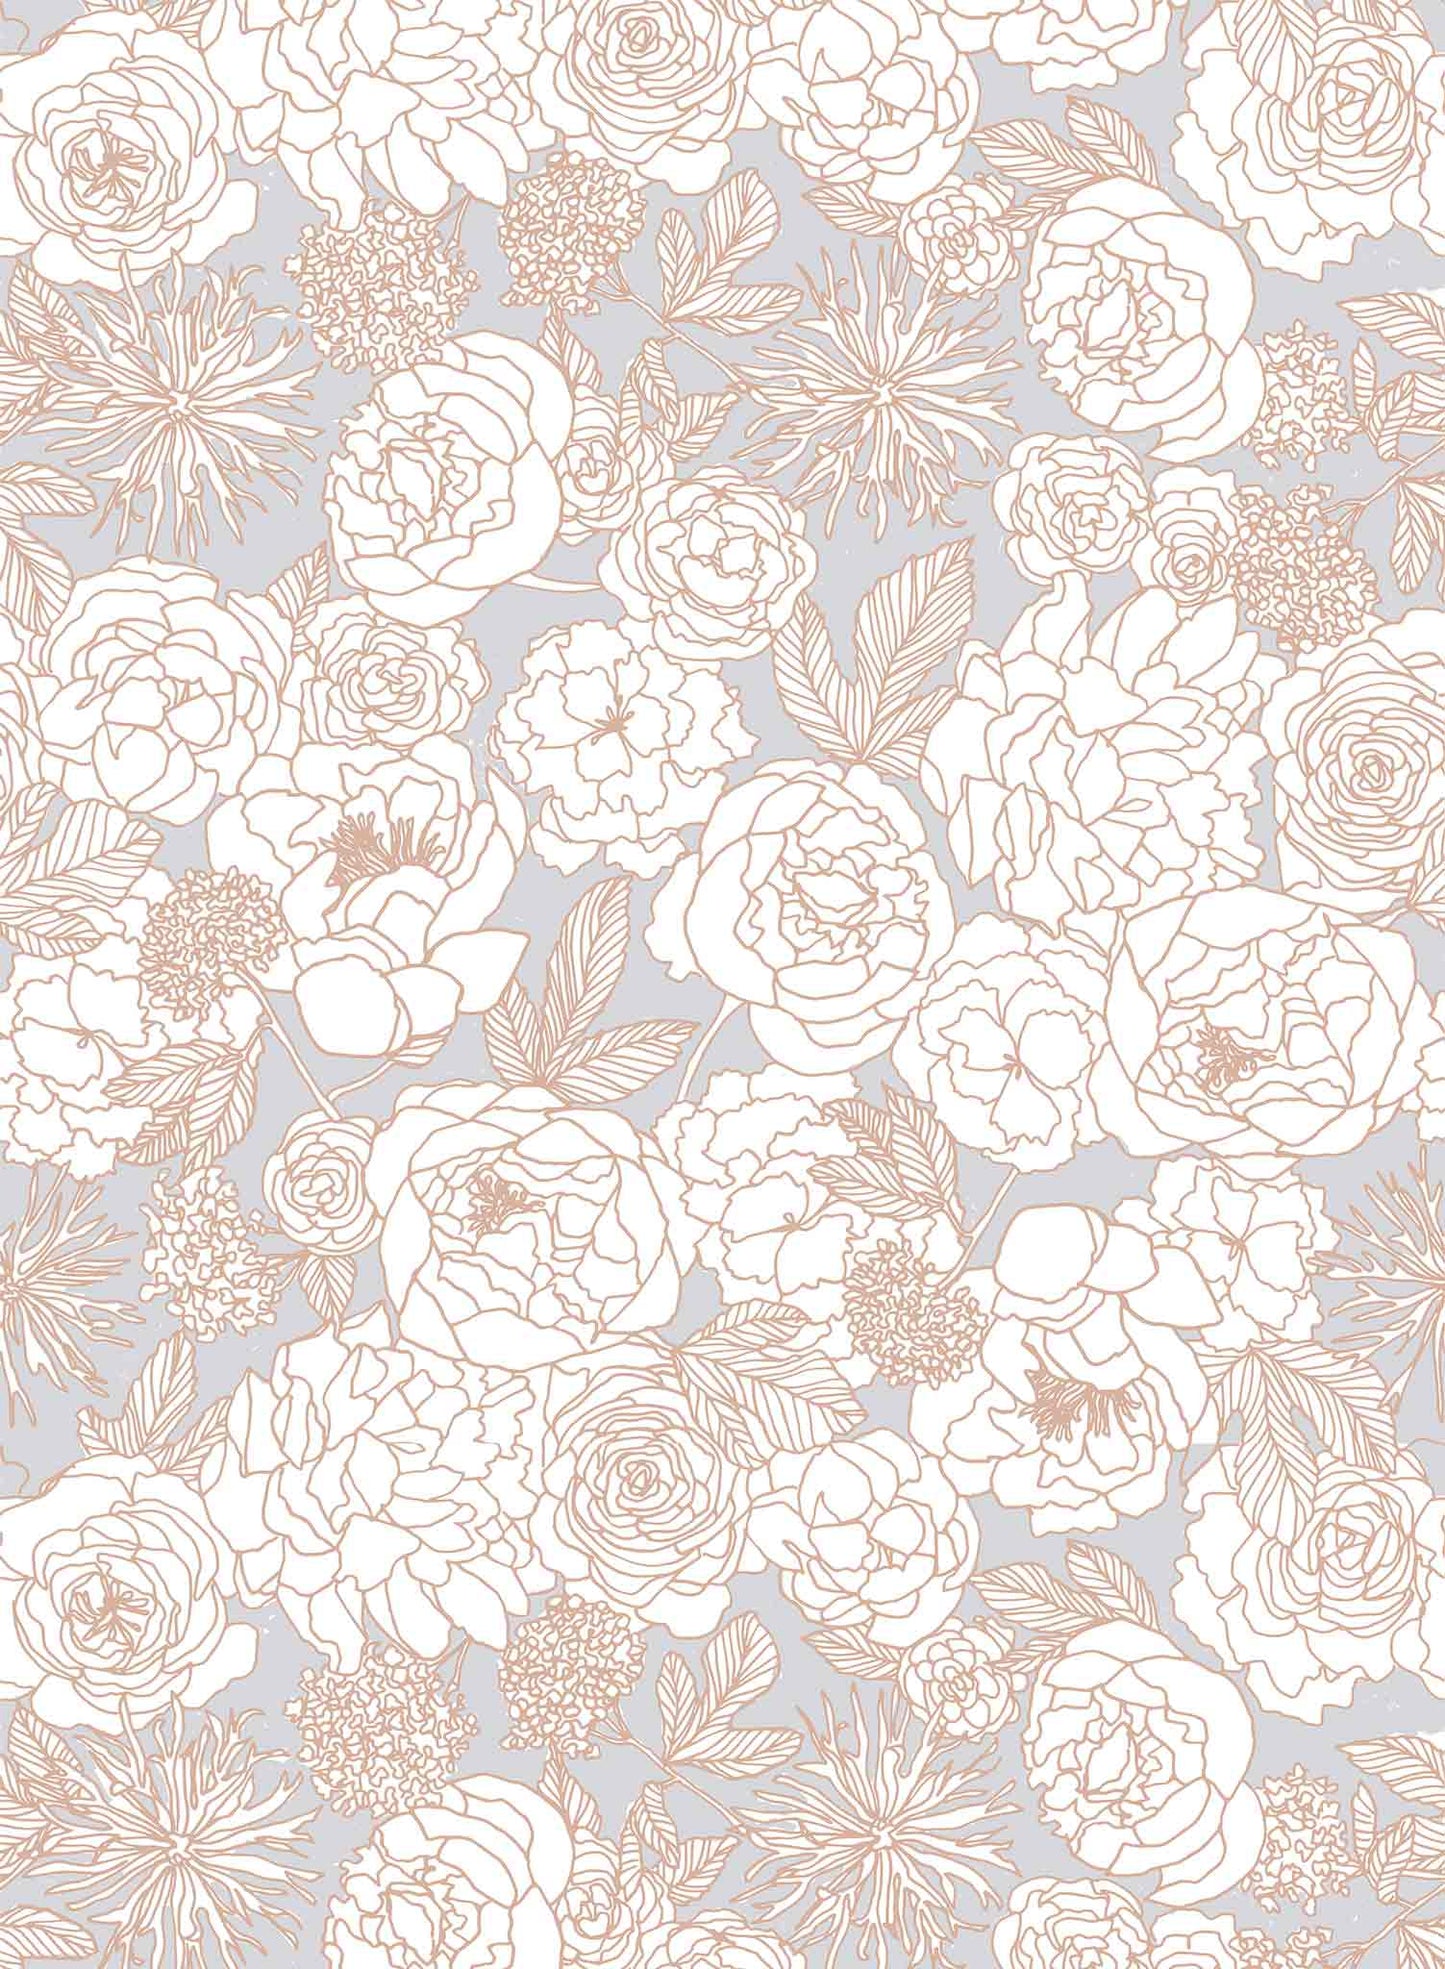 Corsage is a minimalist wallpaper by Opposite Wall of many peony flowers.